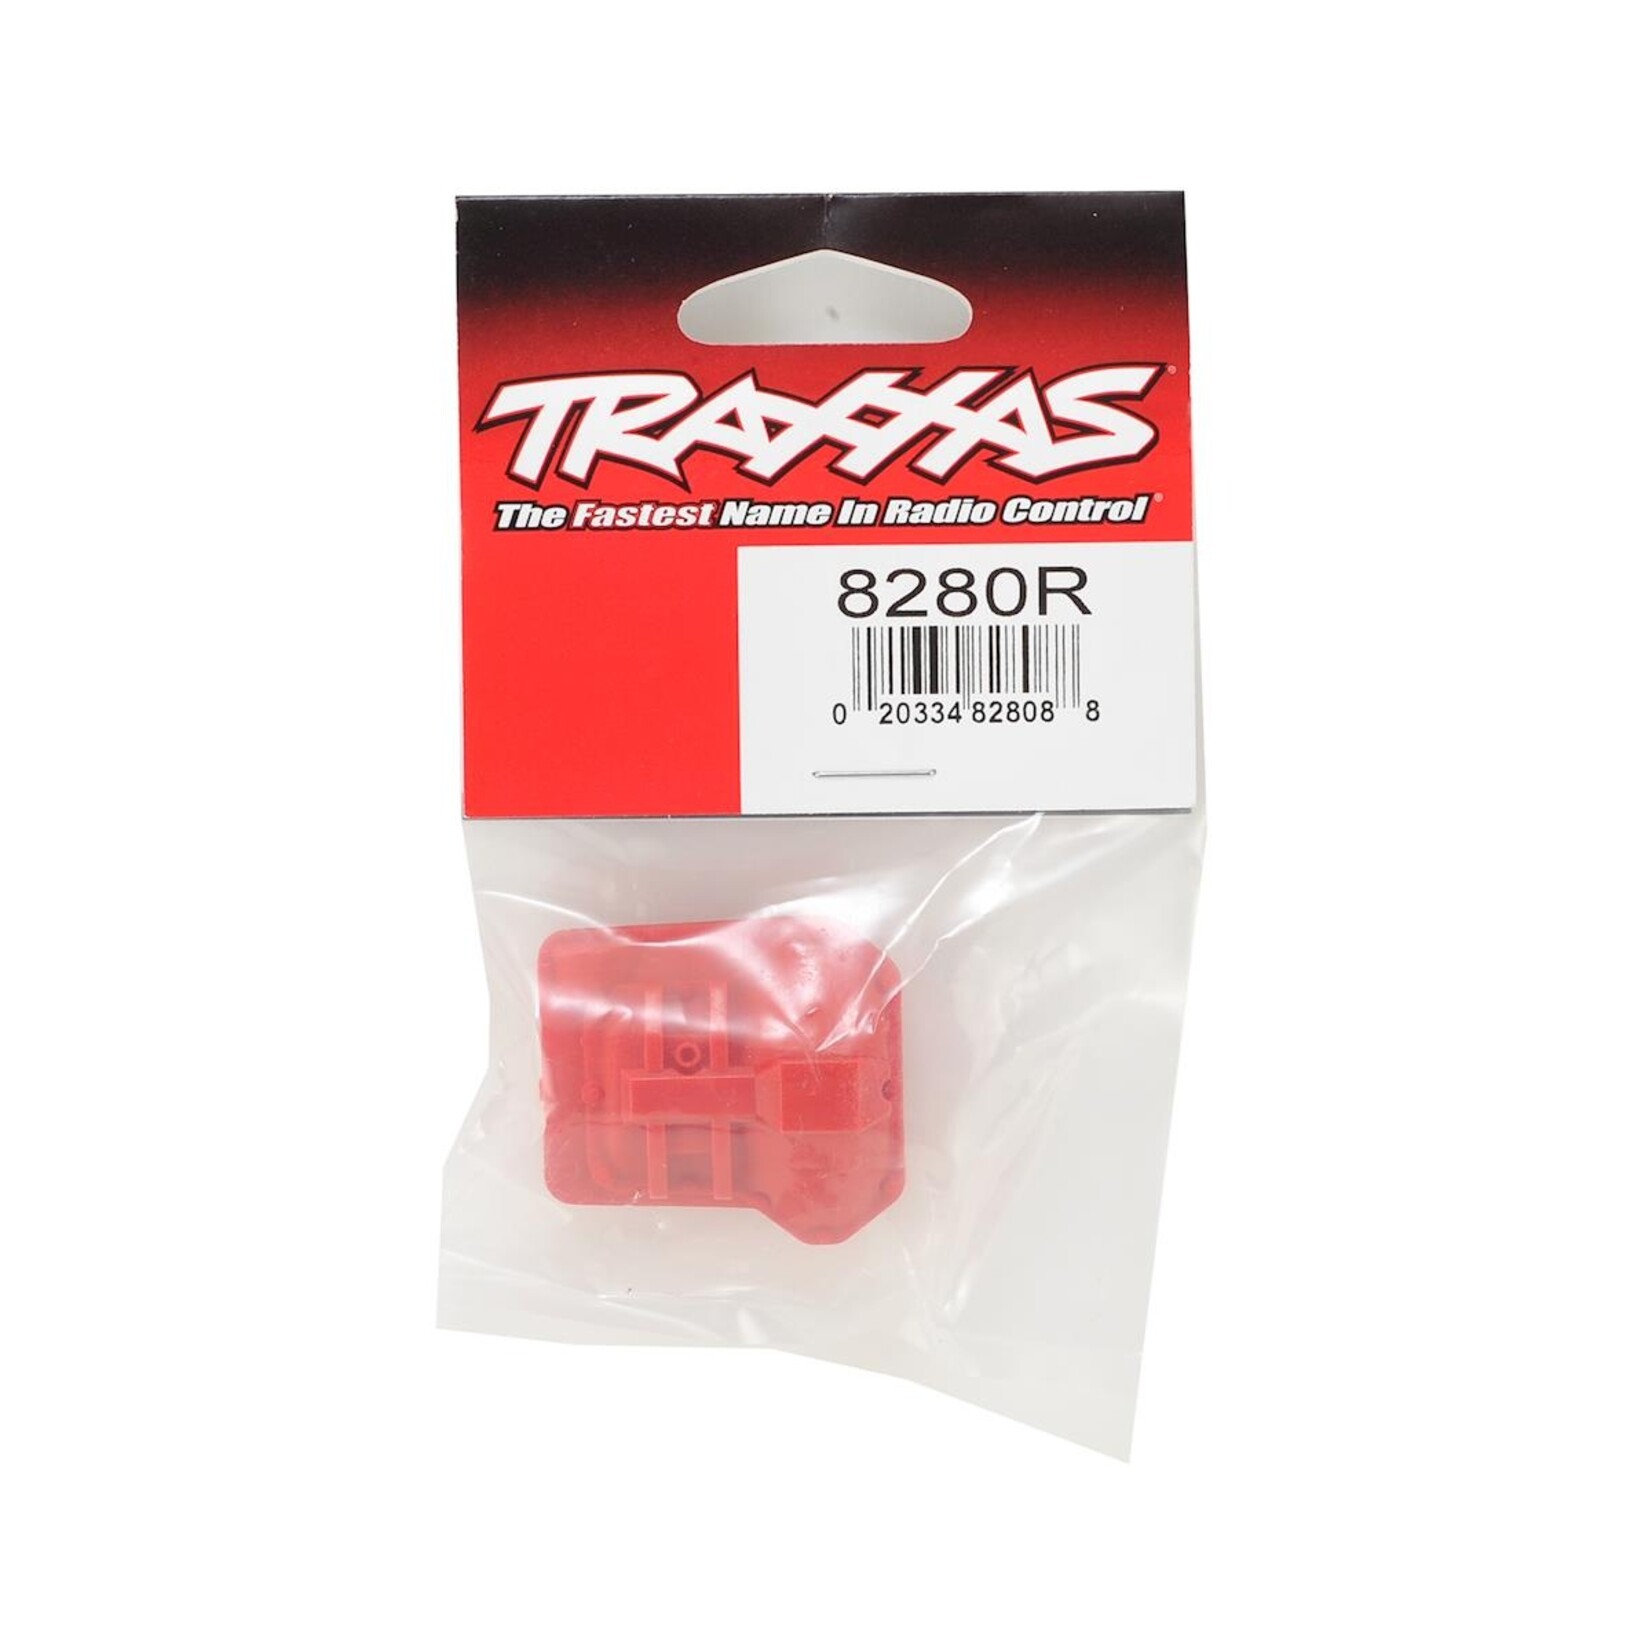 Traxxas Traxxas TRX-4 Differential Cover (Red) #8280R